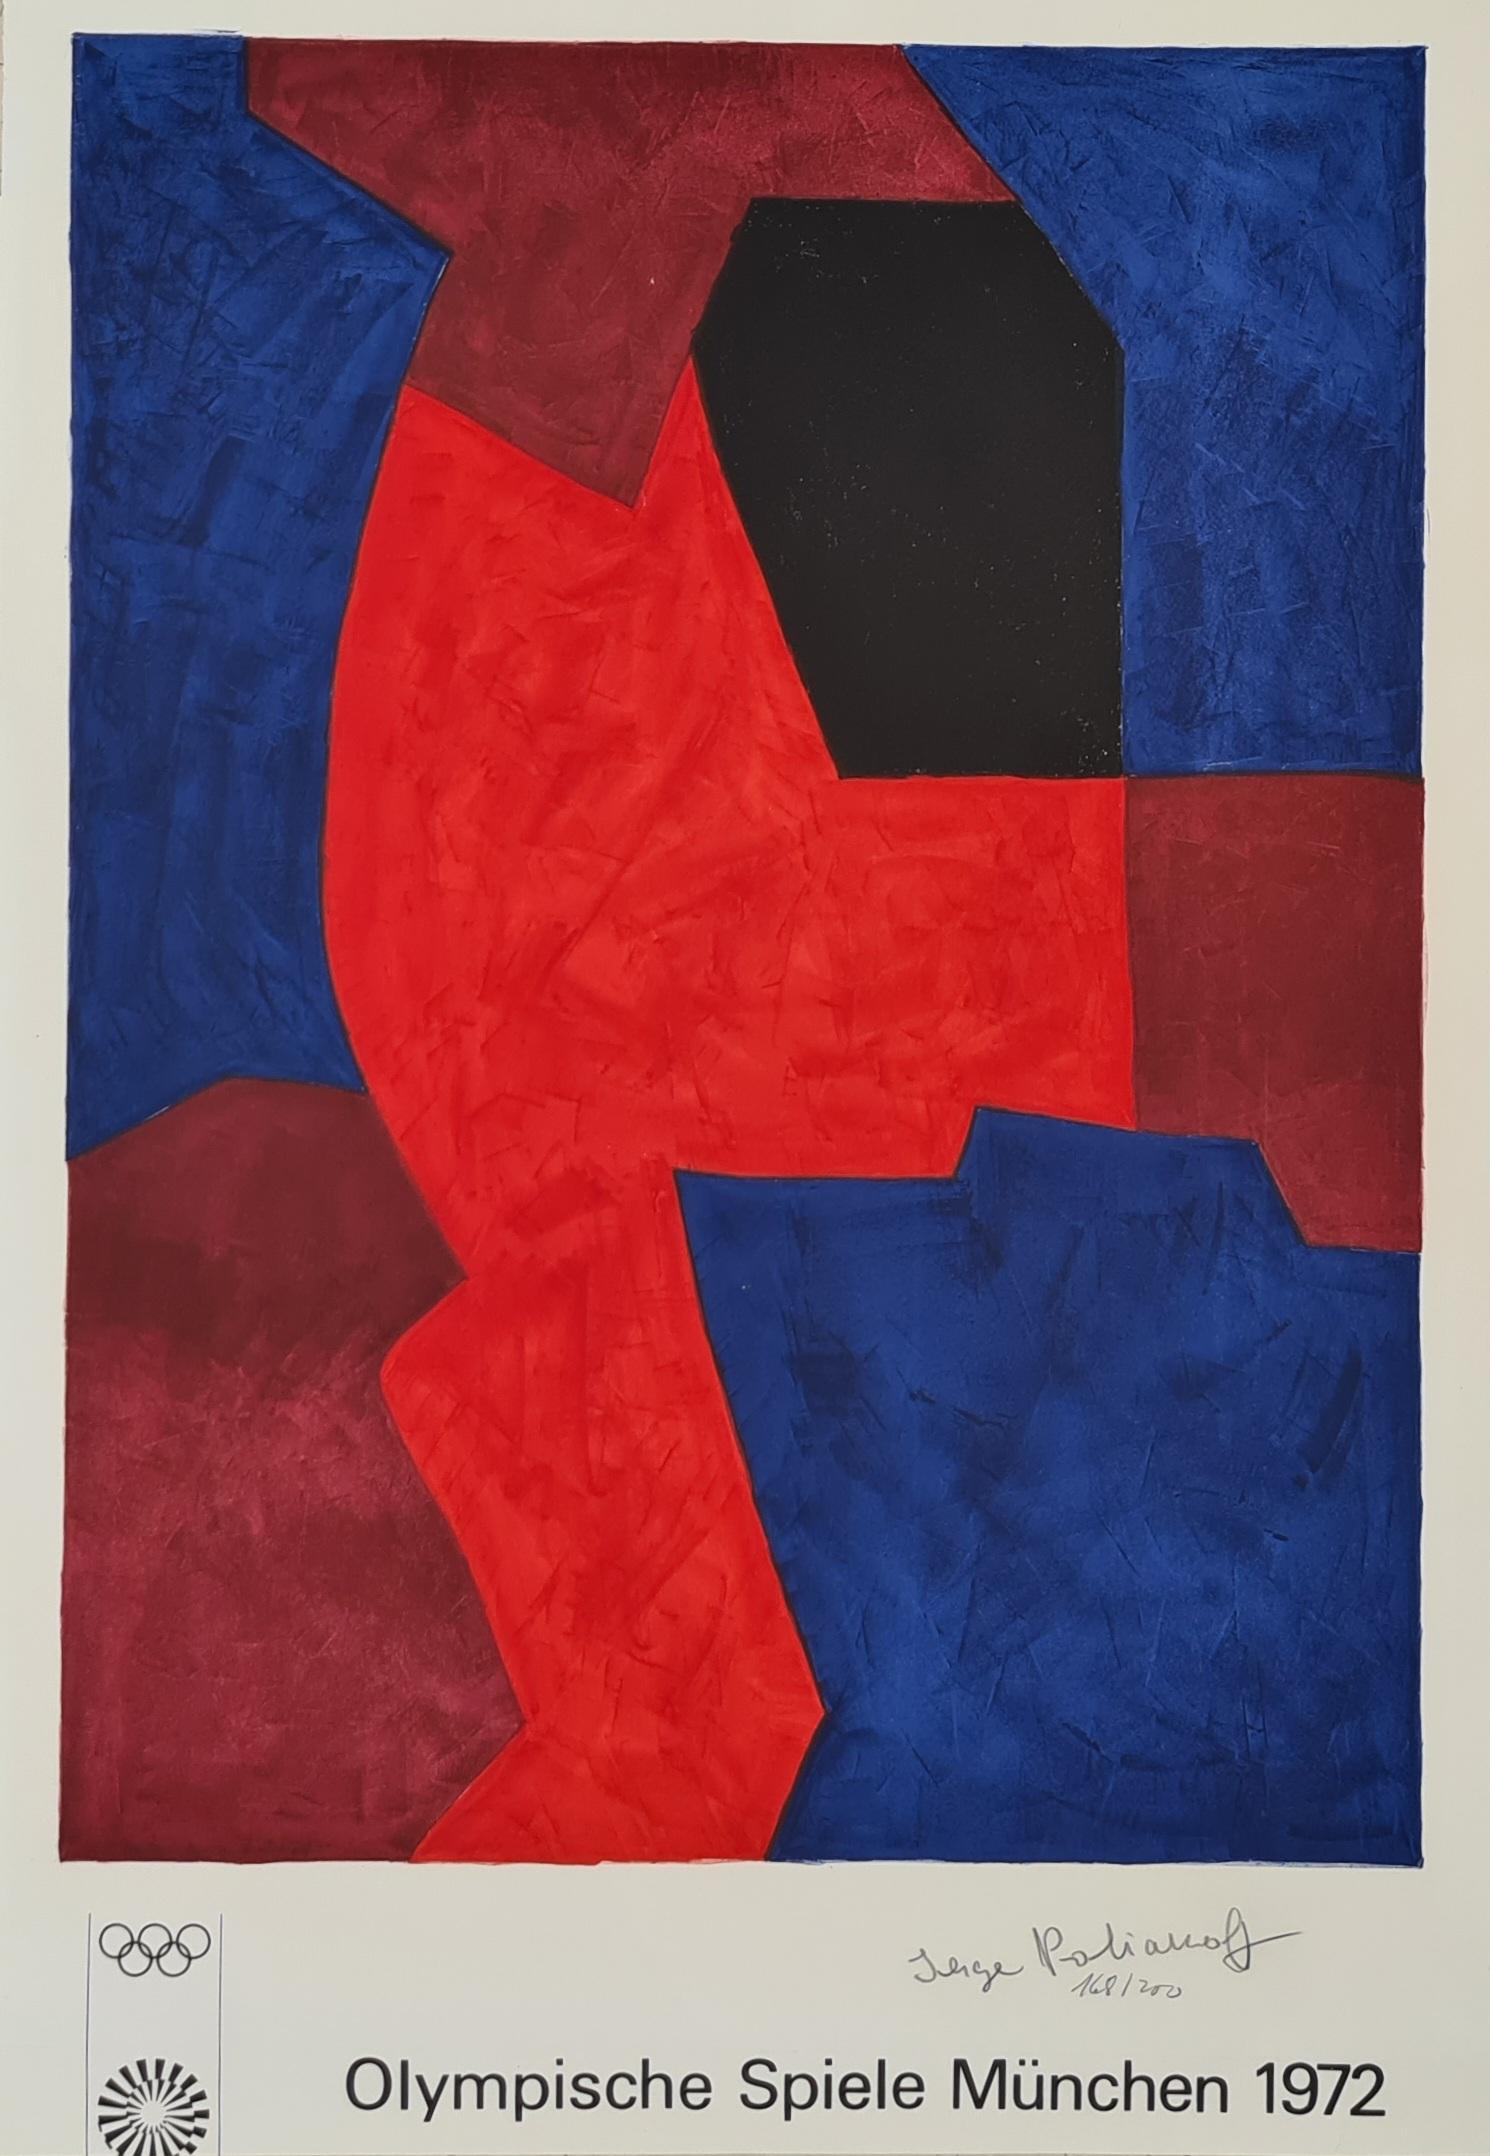 Serge Poliakoff Abstract Print - Composition in blue, red and black 